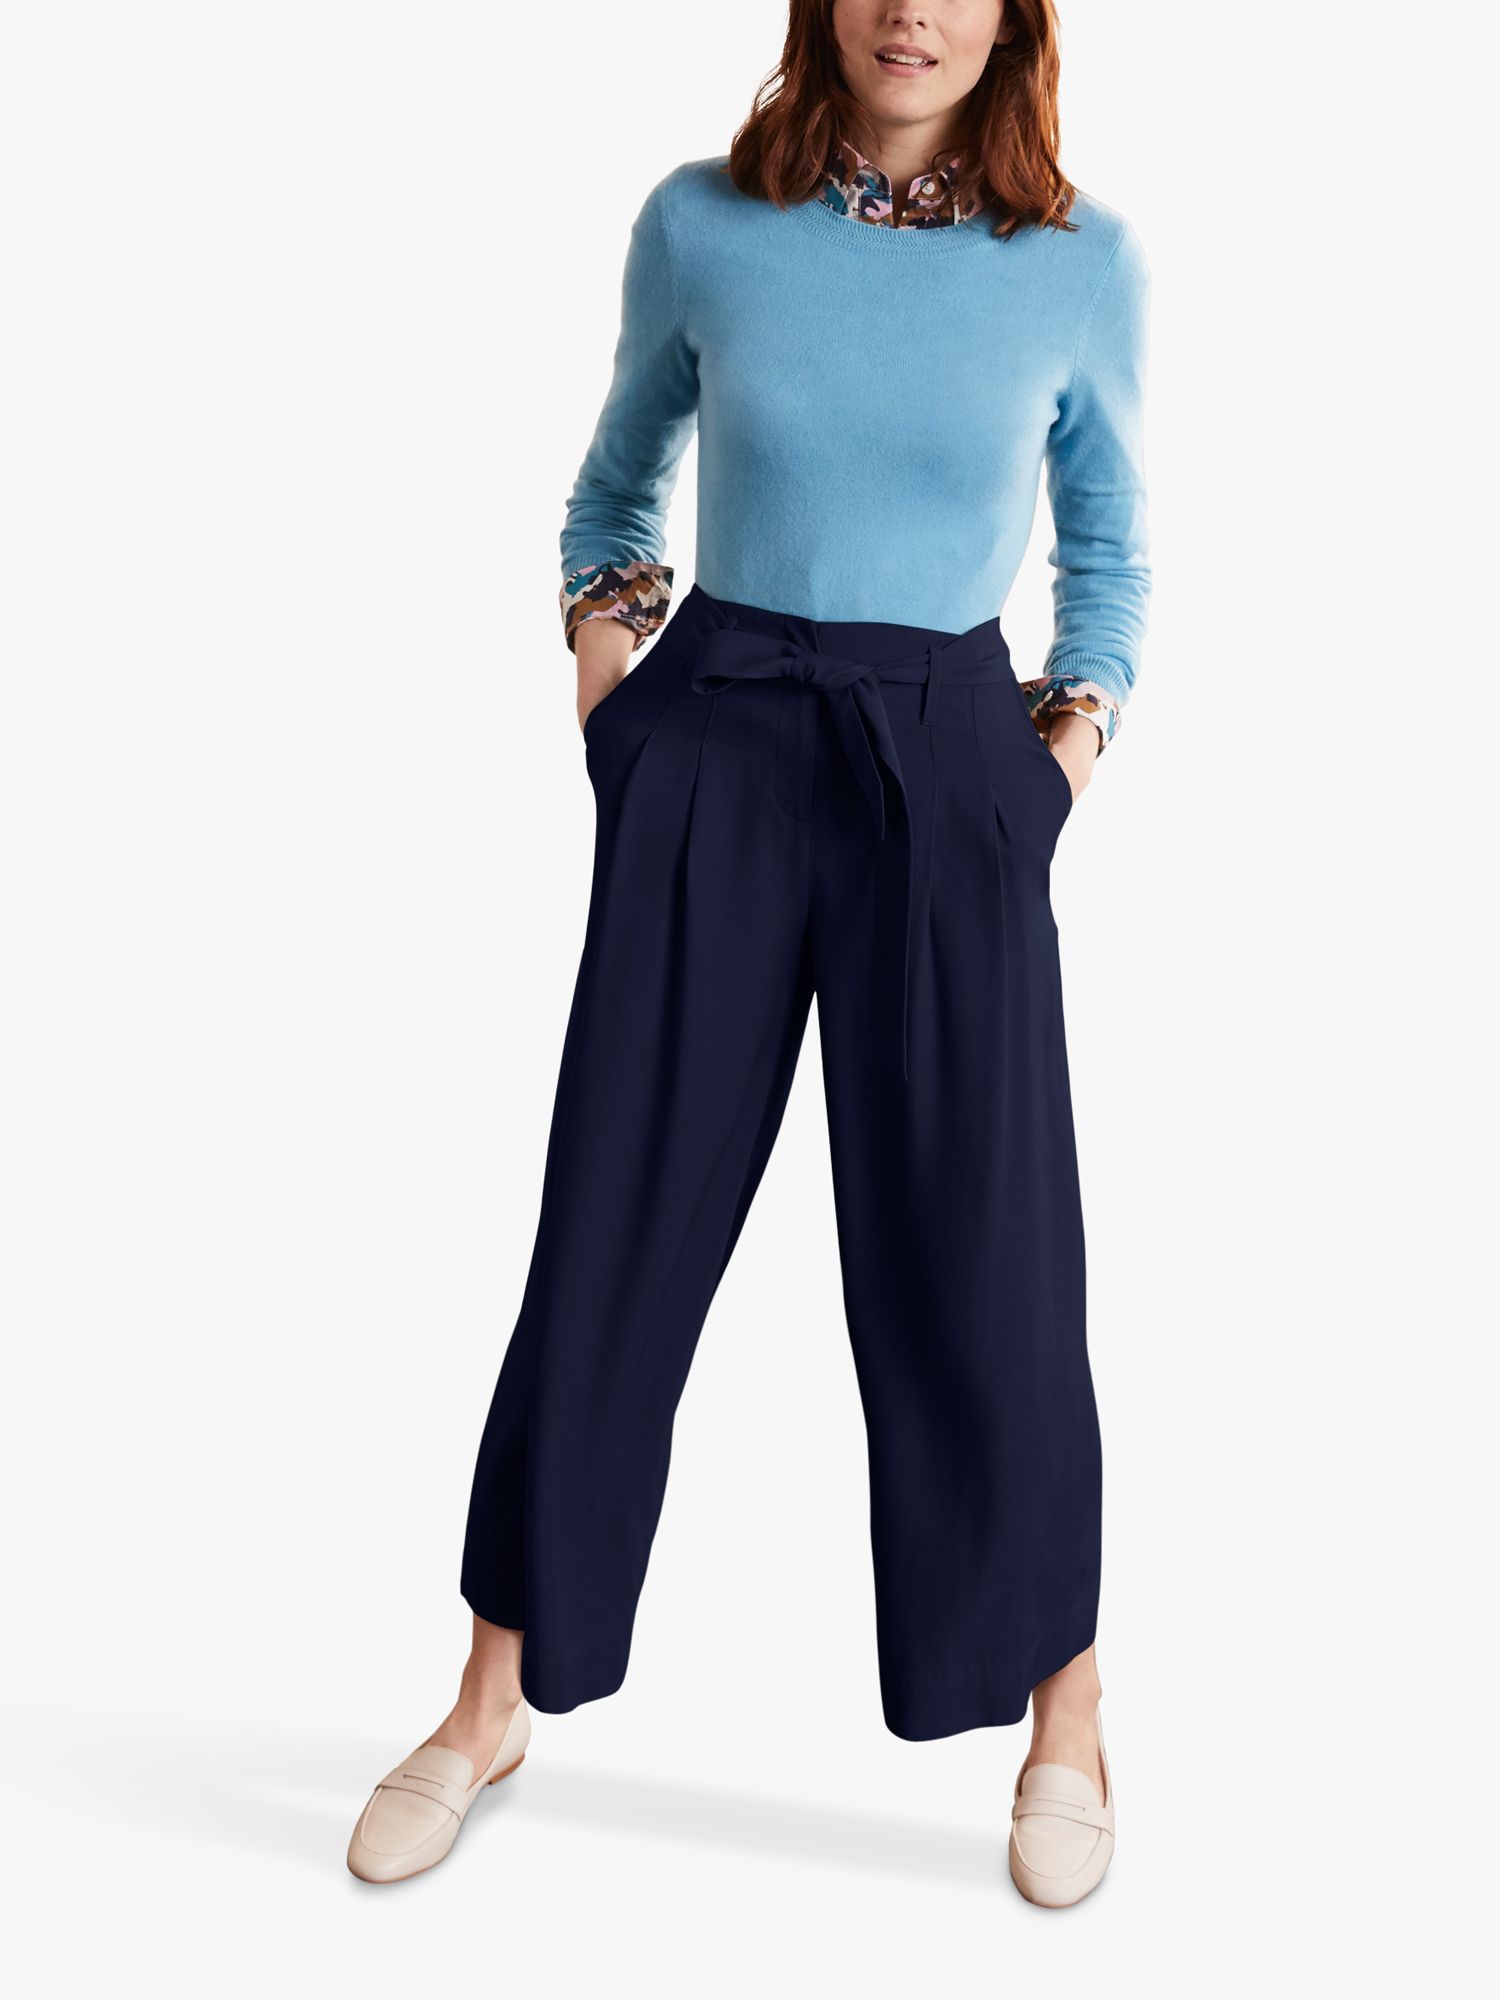 Boden Melville Culottes, Navy at John Lewis & Partners